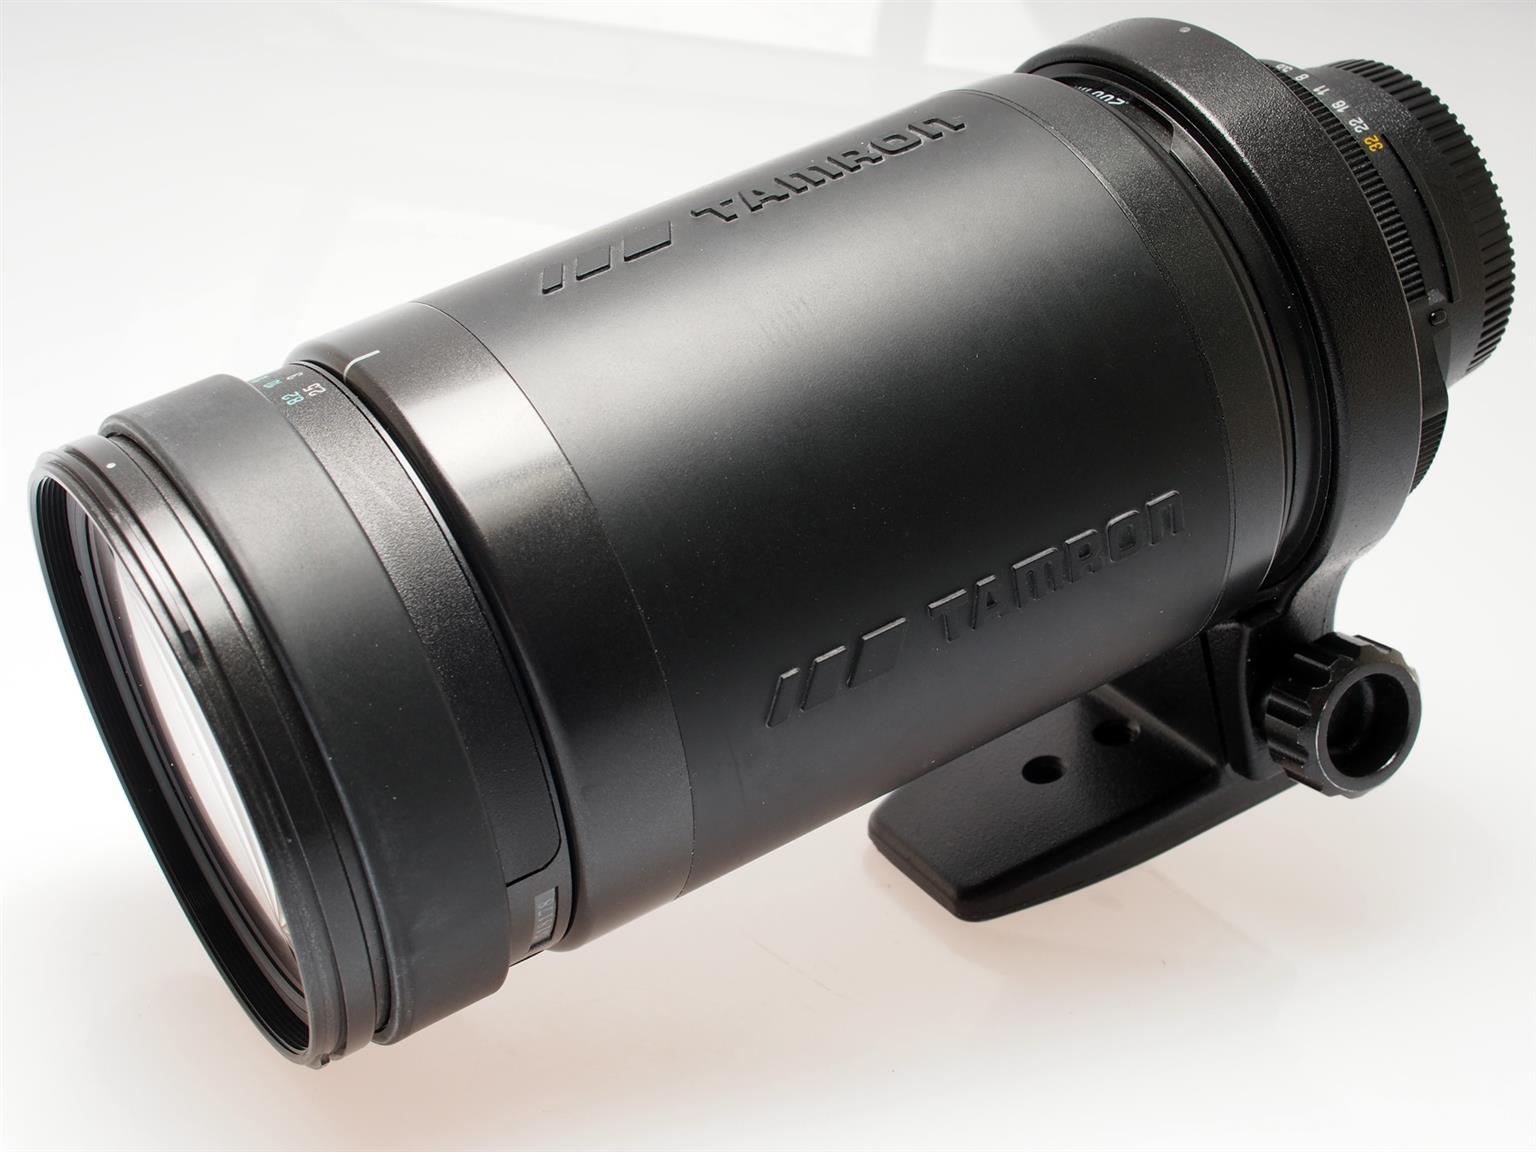 Tamron Zoom 200-400mm Push-Pull Lens for Canon